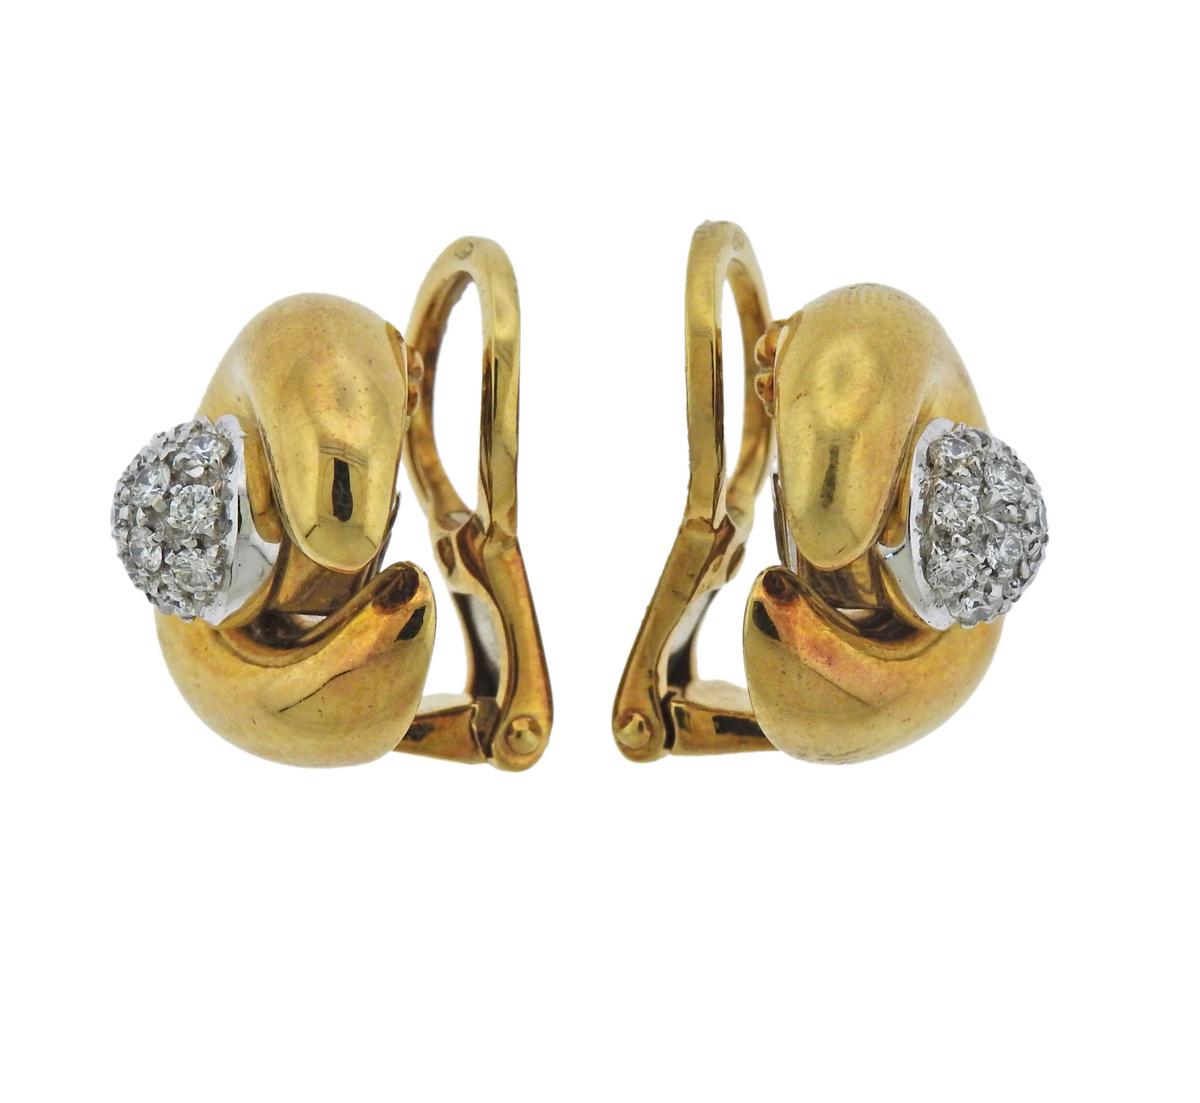 Pair of day & night 18k gold Pomellato earrings, set with approx. 0.28ctw in G/VS diamonds. Centers can be worn as studs.  Earrings are 15mm x 15mm, studs (centers) are 7mm in diameter, weigh 16.6 grams. Marked: 750, Pomellato.